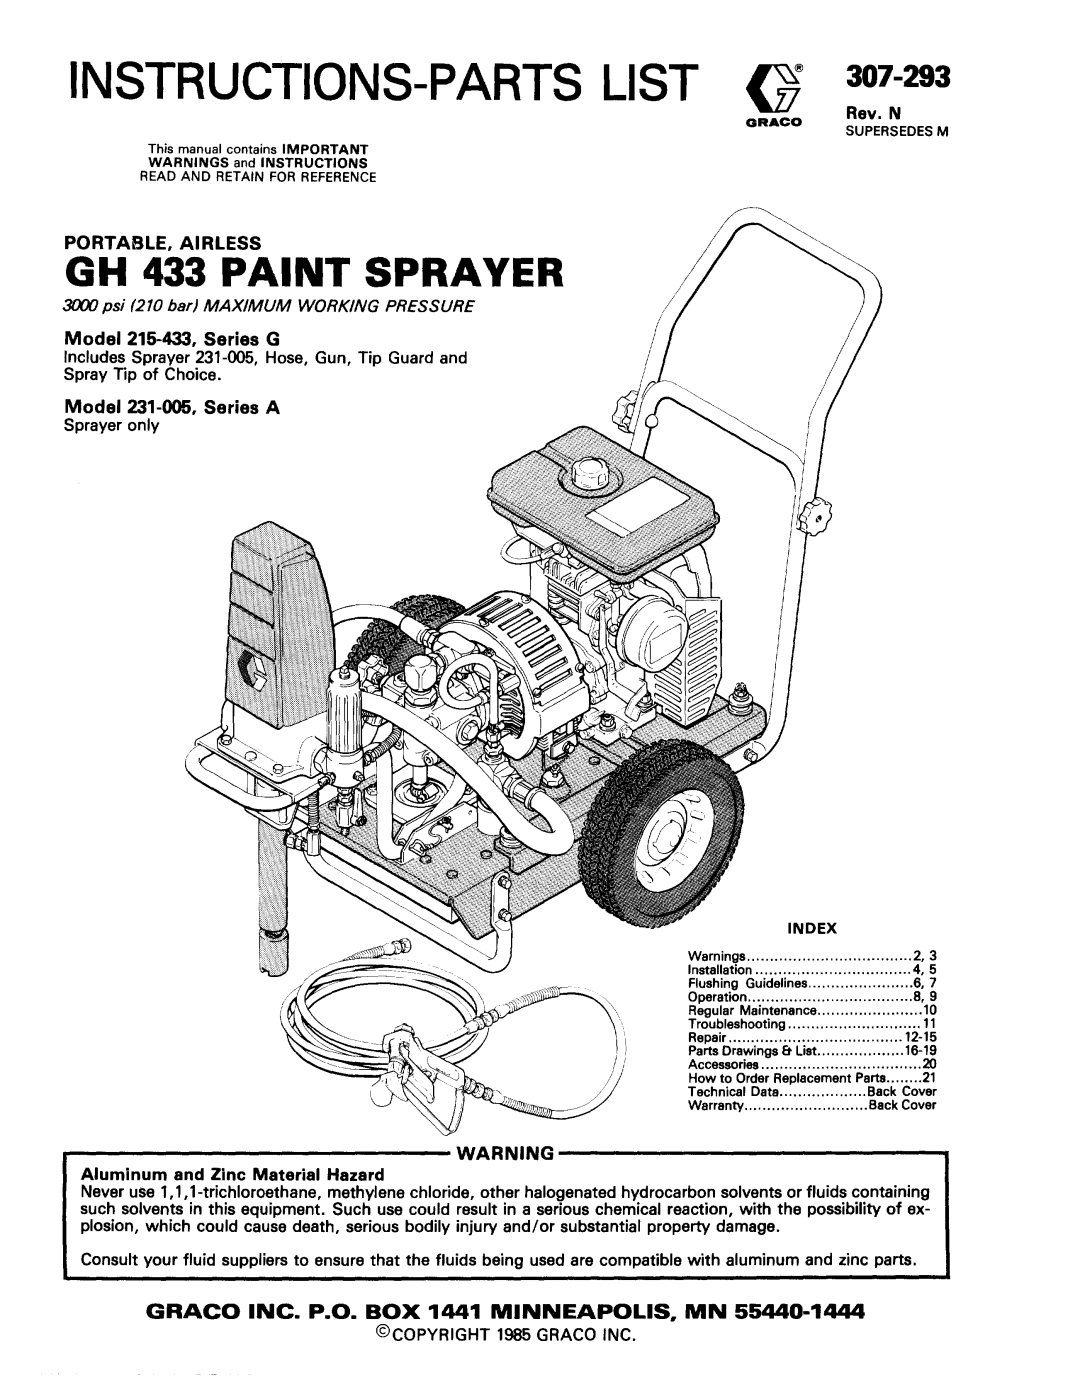 Graco 262854 important safety instructions Important Safety Instructions, XHF Spray Gun, Instructions - Parts, 3A2799A 